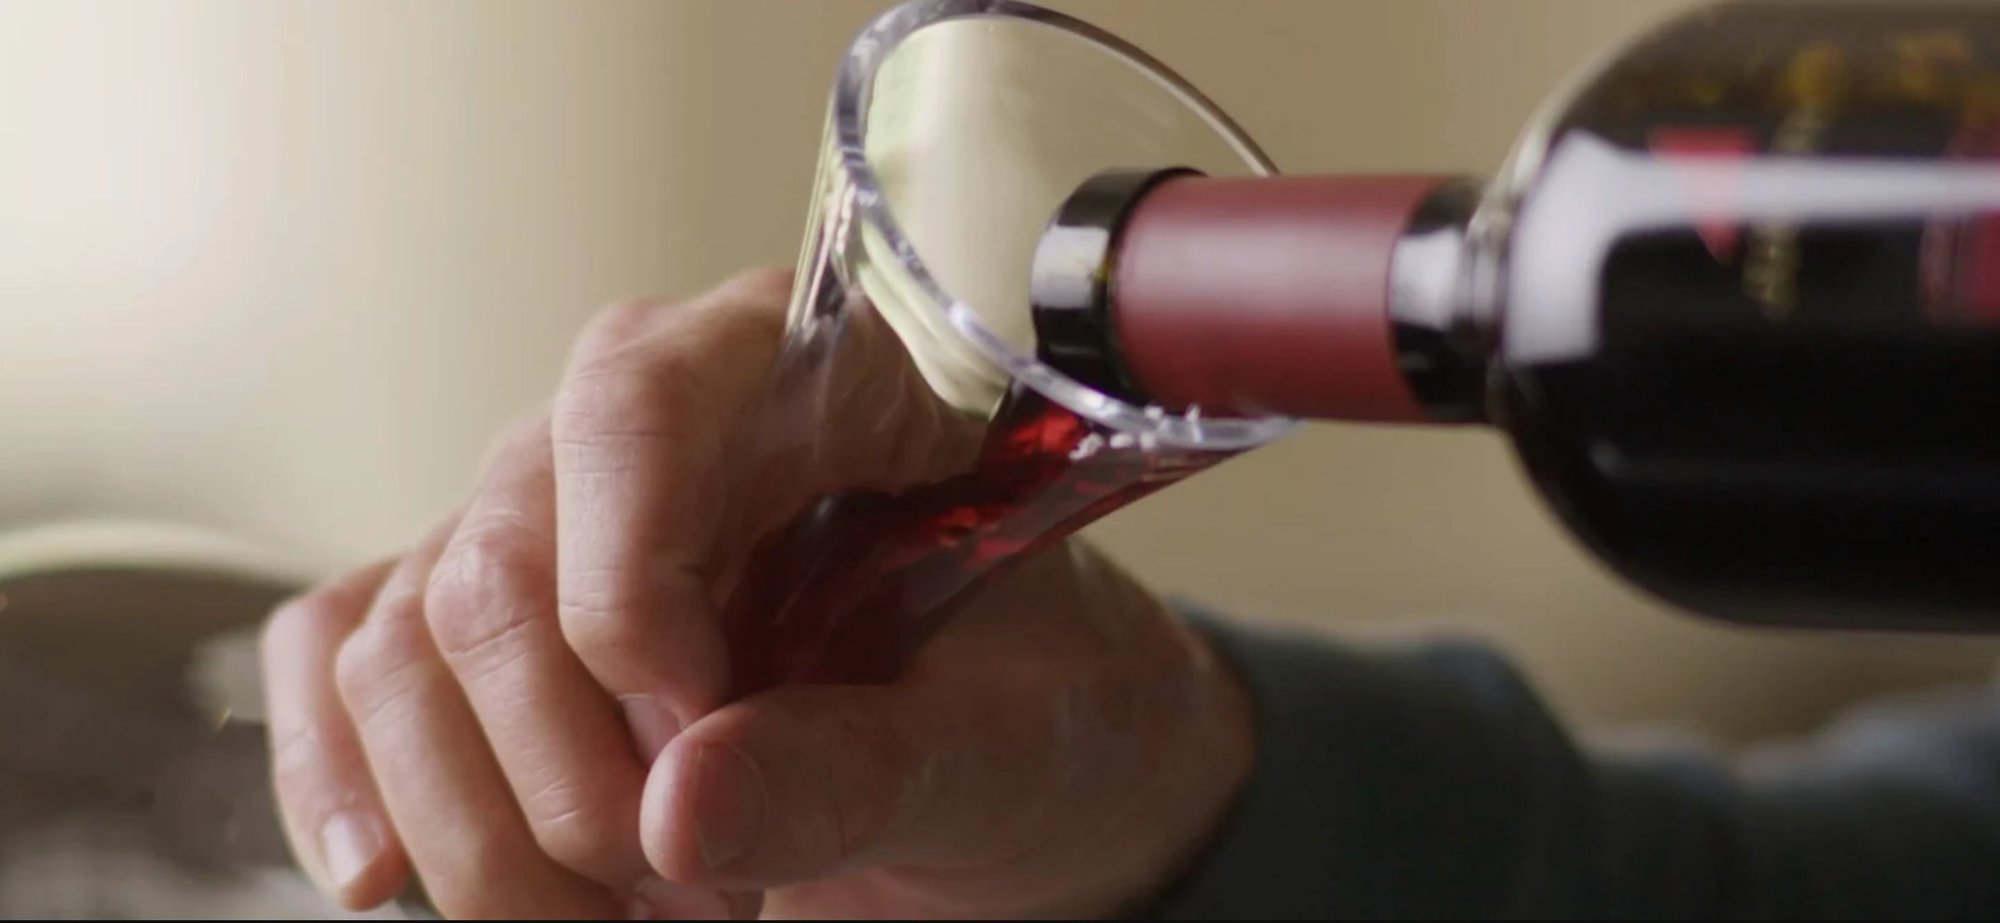 A man's hand grips a small glass, pouring a bottle of red wine into it. 